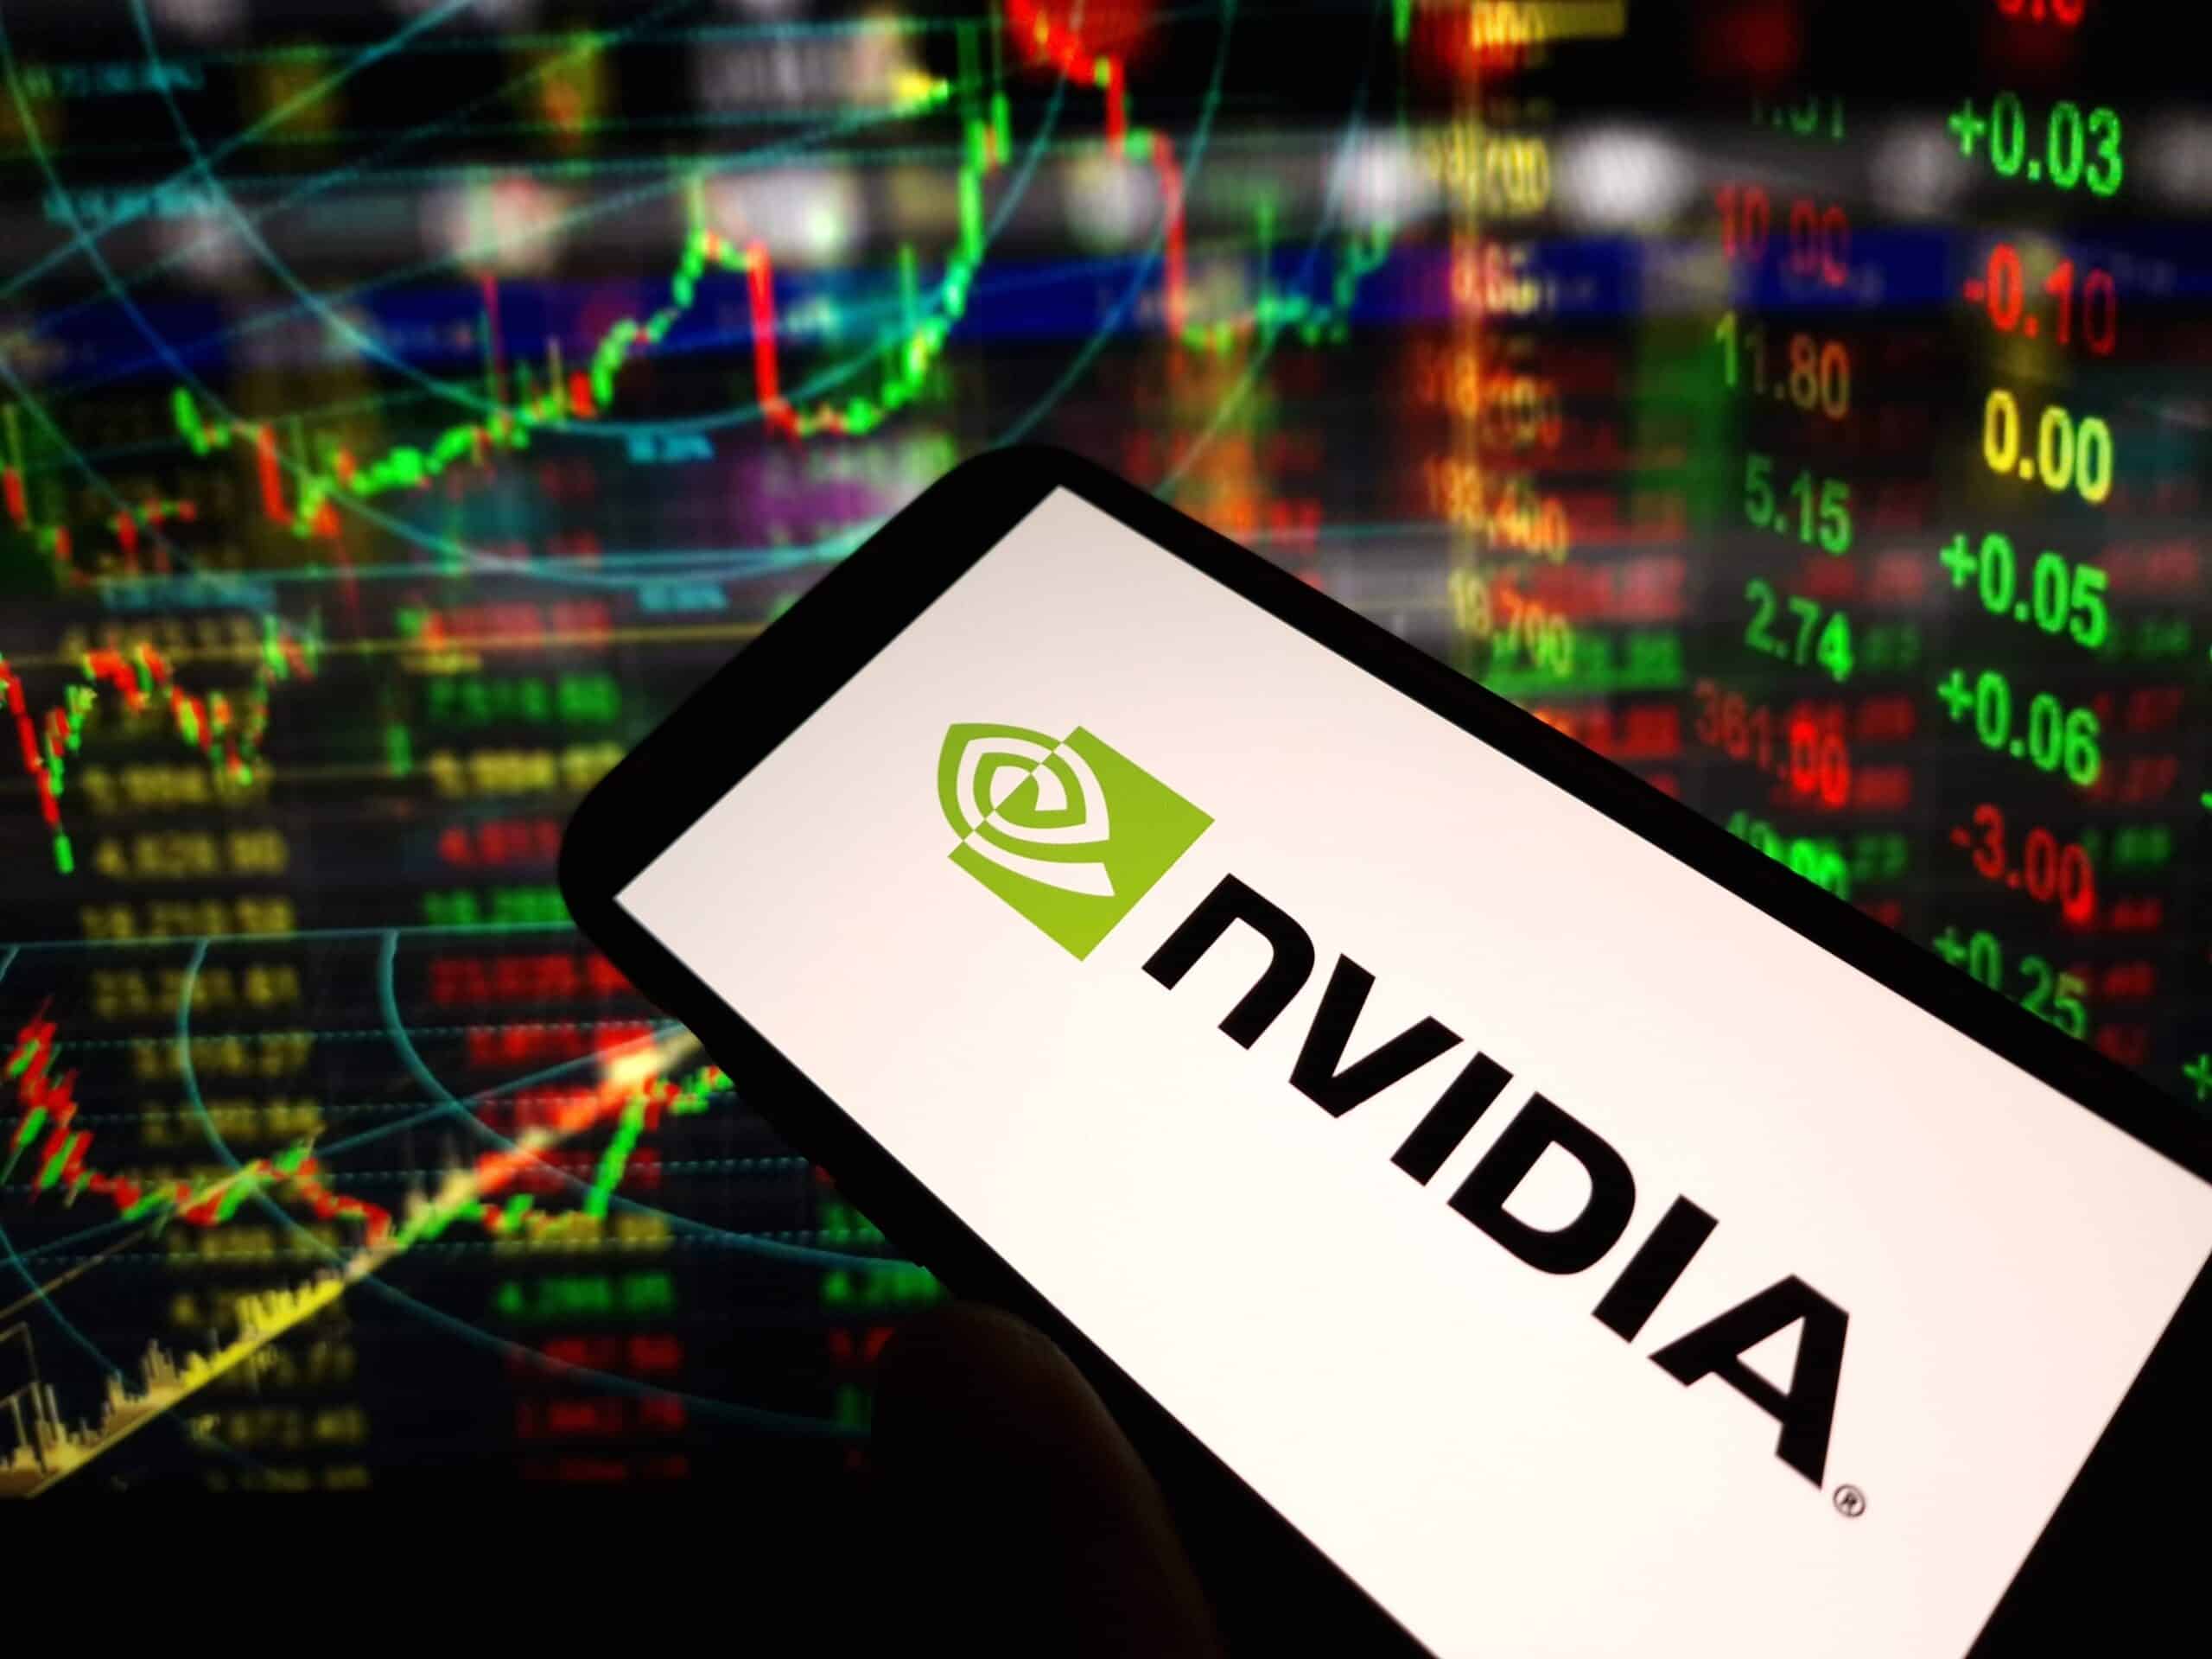 NVIDIA Surpasses Apple: The Rise to Become the World's Second-Most Valuable Company